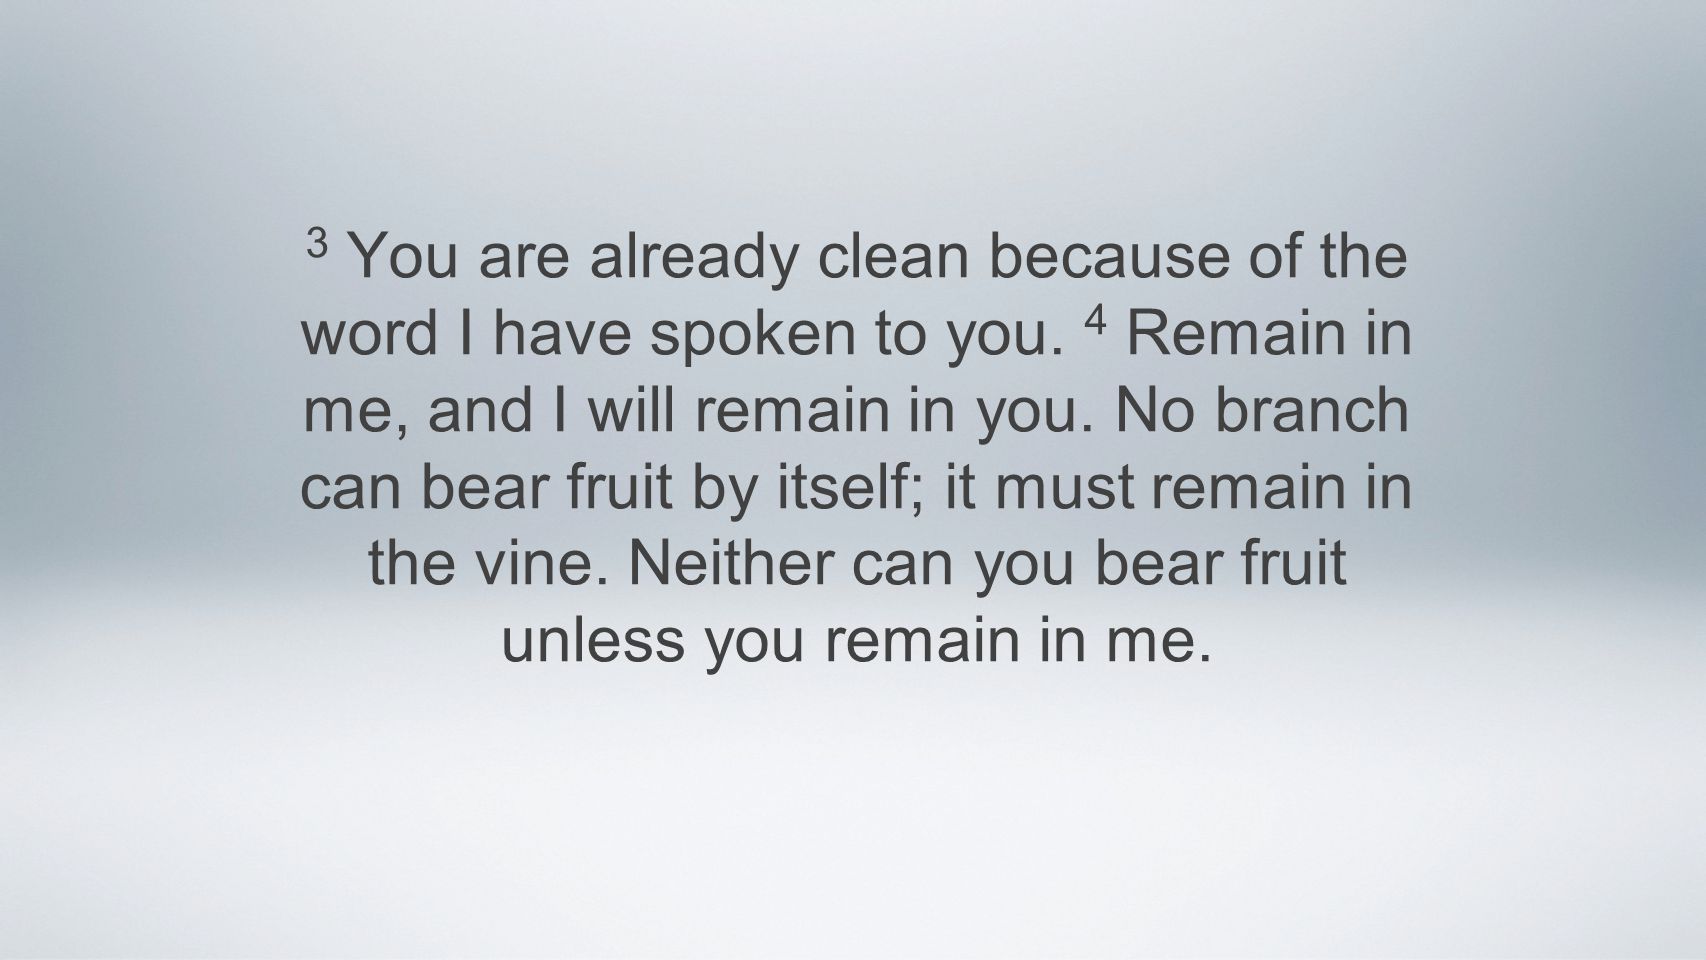 3 You are already clean because of the word I have spoken to you.